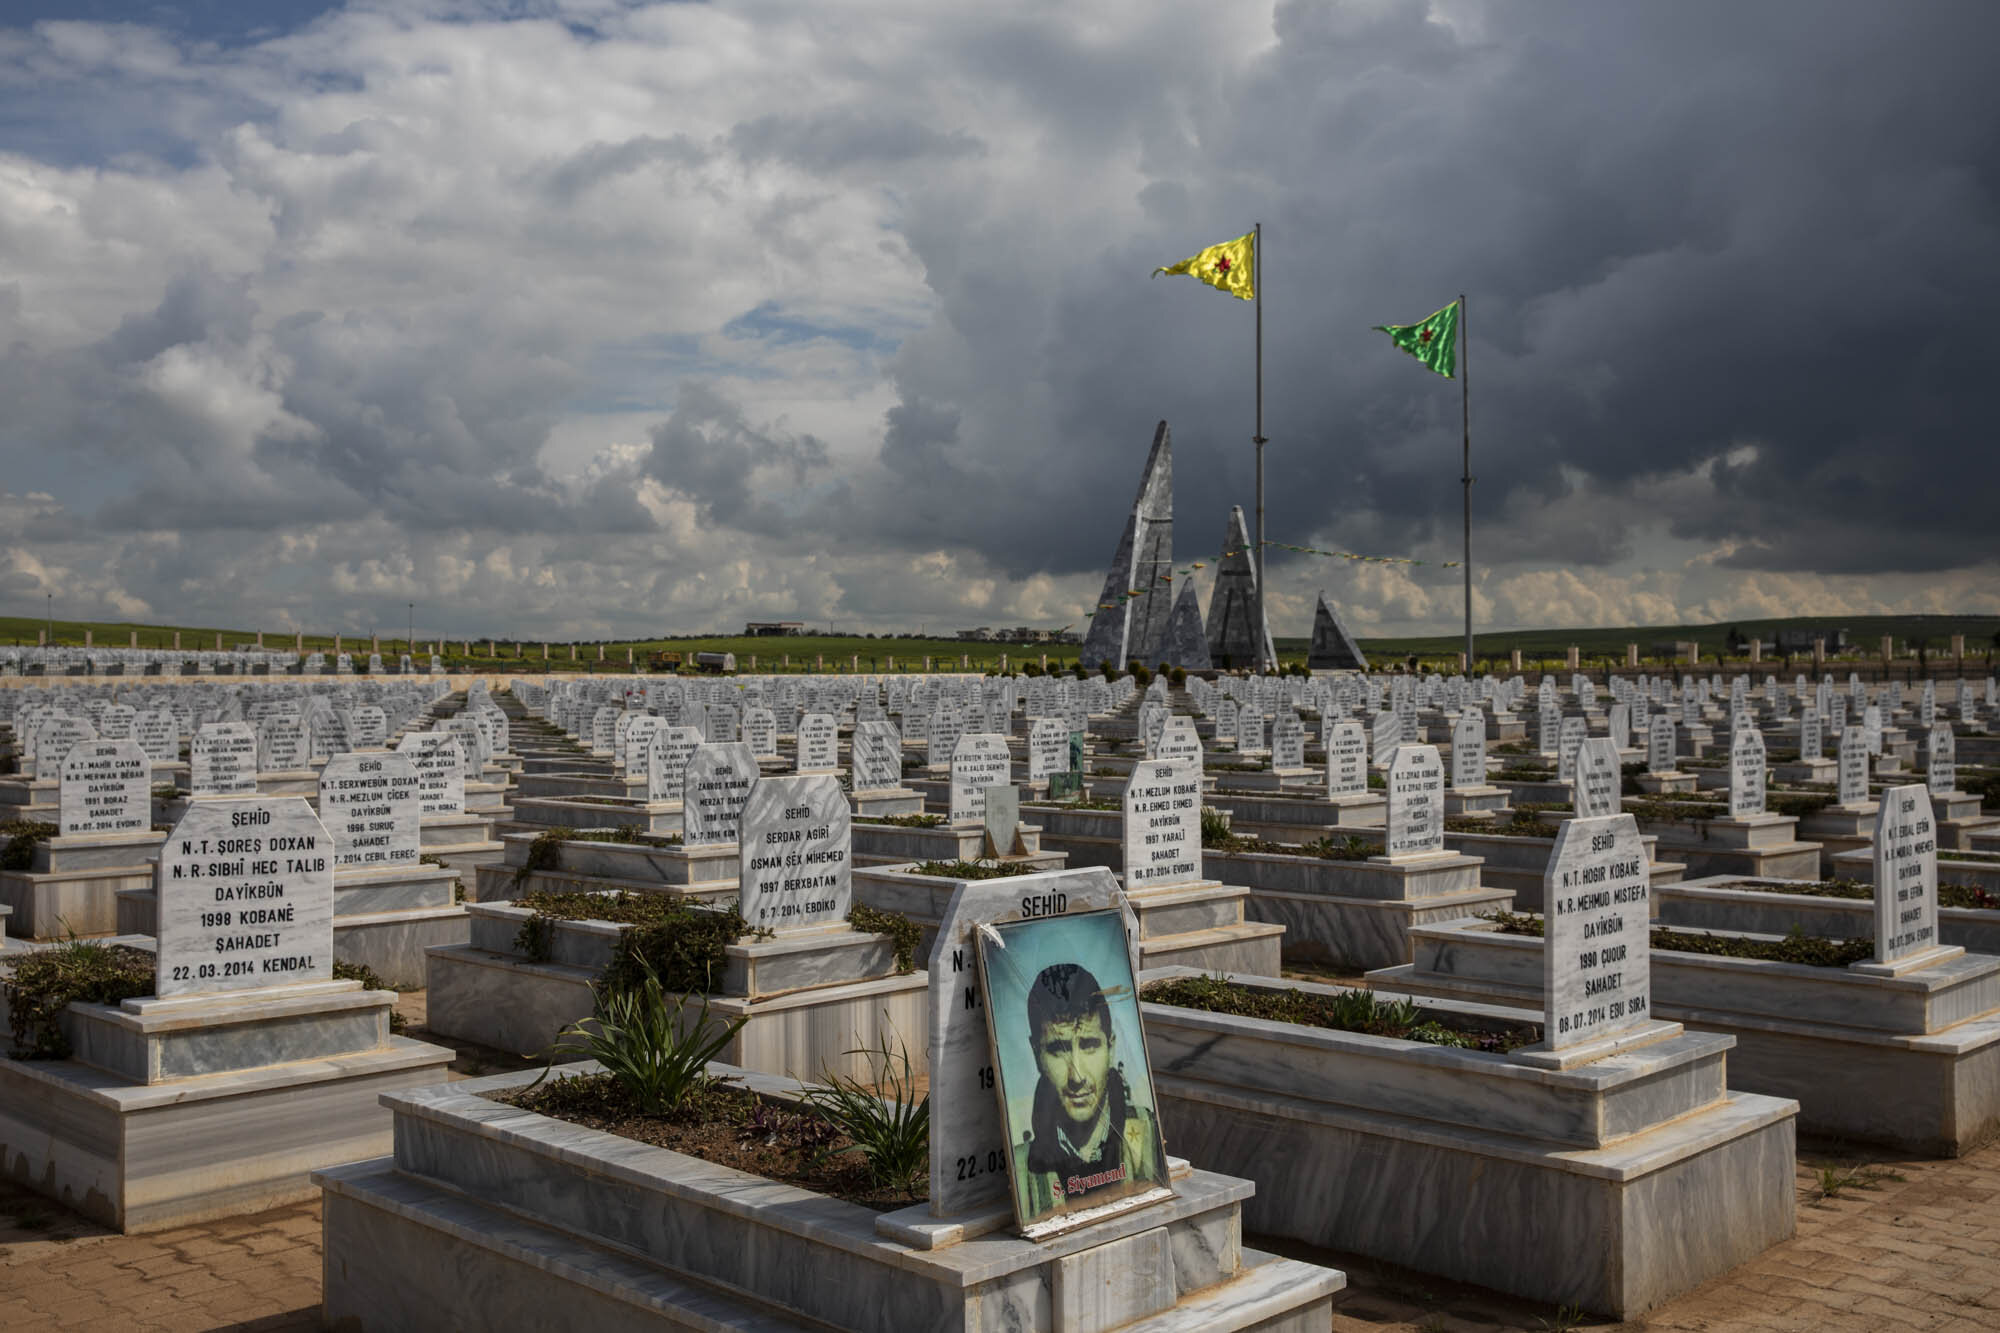  A portrait of a martyred Kurdish fighter, who died during the fight against ISIS, sat amidst a sea of graves at the martyrs cemetery in Kobani, northern Syria. The US backed Syrian democratic forces released a statement claiming that they had lost m